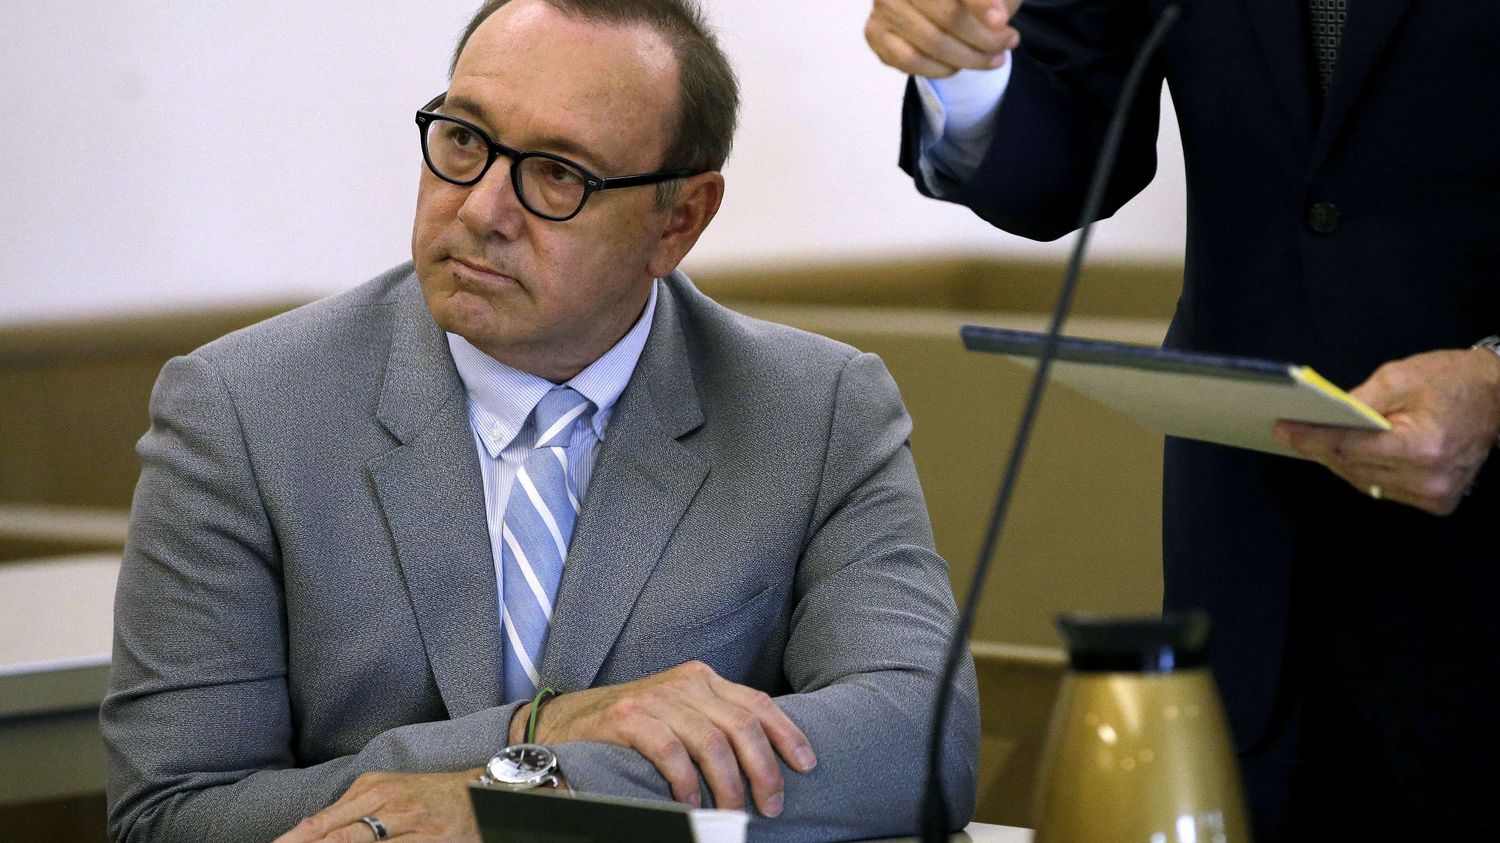 American actor Kevin Spacey sued in the UK for four sexual assaults against three men
